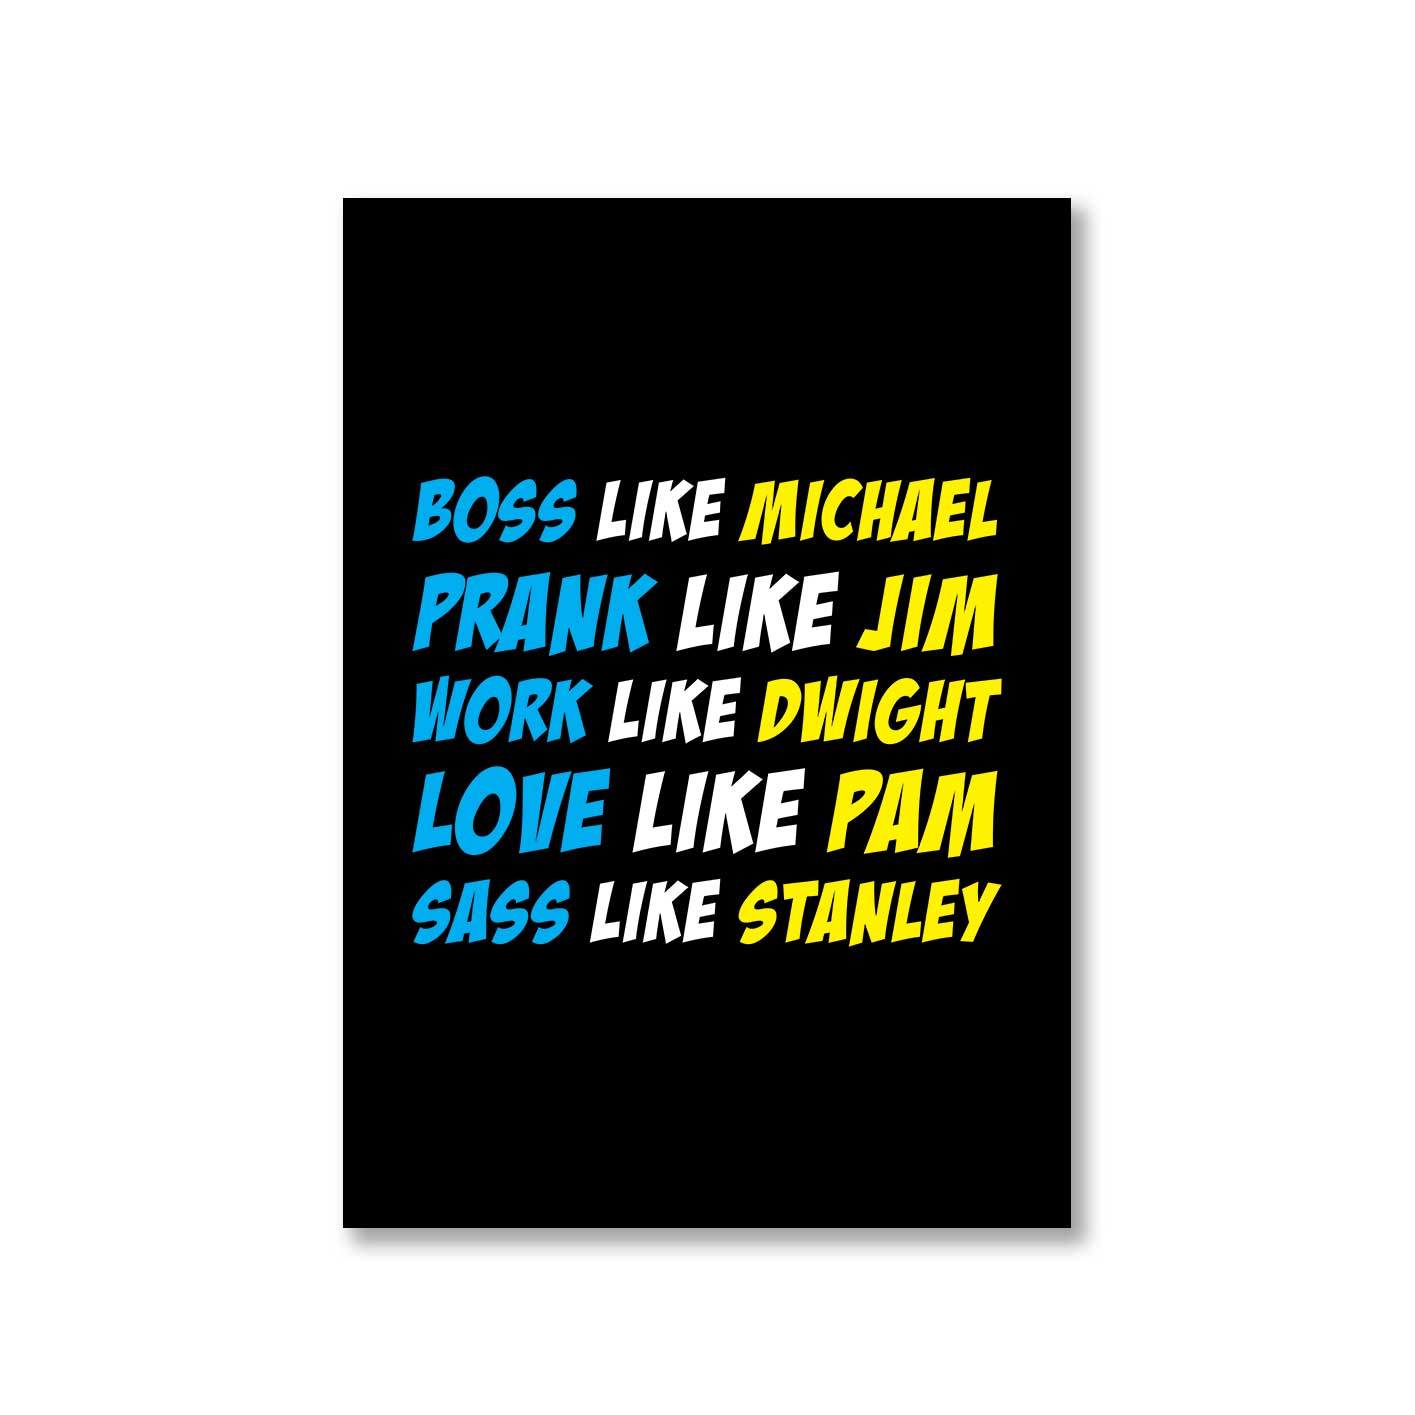 the office be like poster wall art buy online united states of america usa the banyan tee tbt a4 - michael jim dwight pam stanley